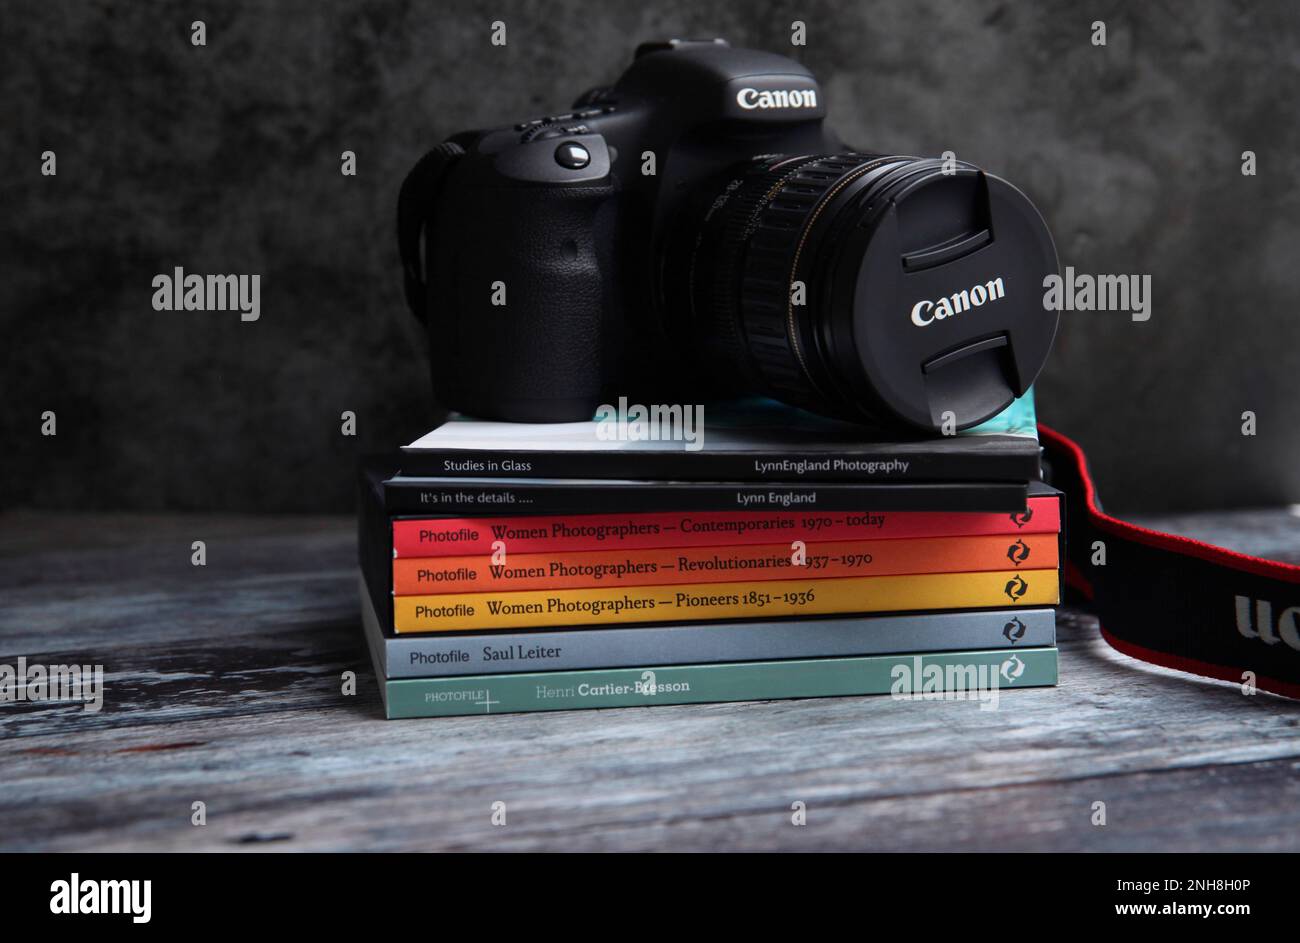 Canon DSLR in still life image on a stack of photography books Stock Photo